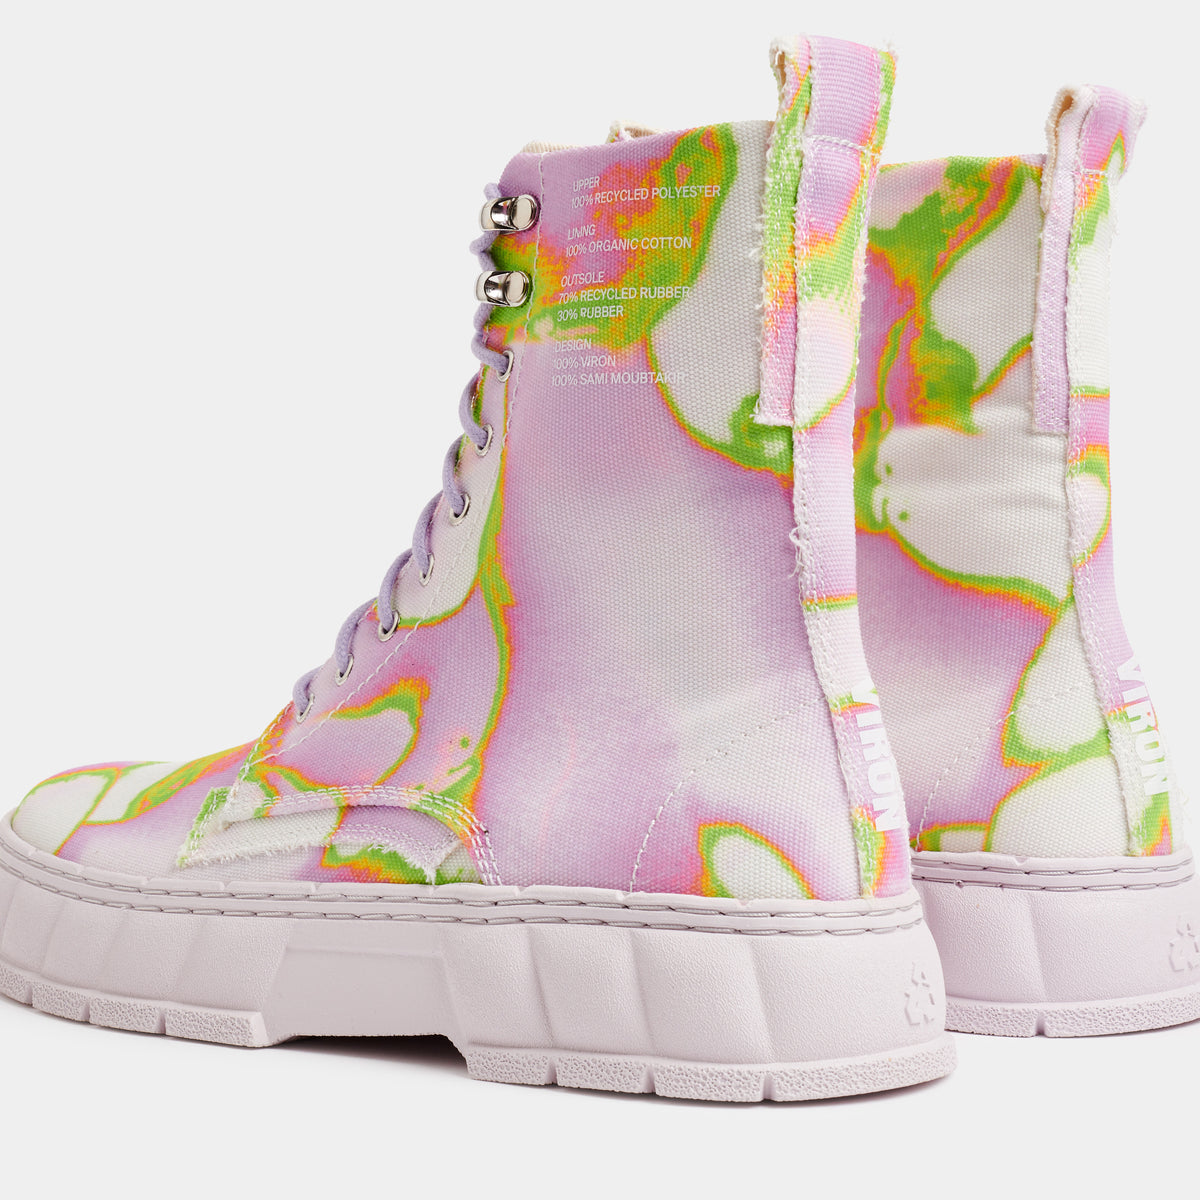 1992 Vegan combat boot made from recycled PET in pink and green shown from the back